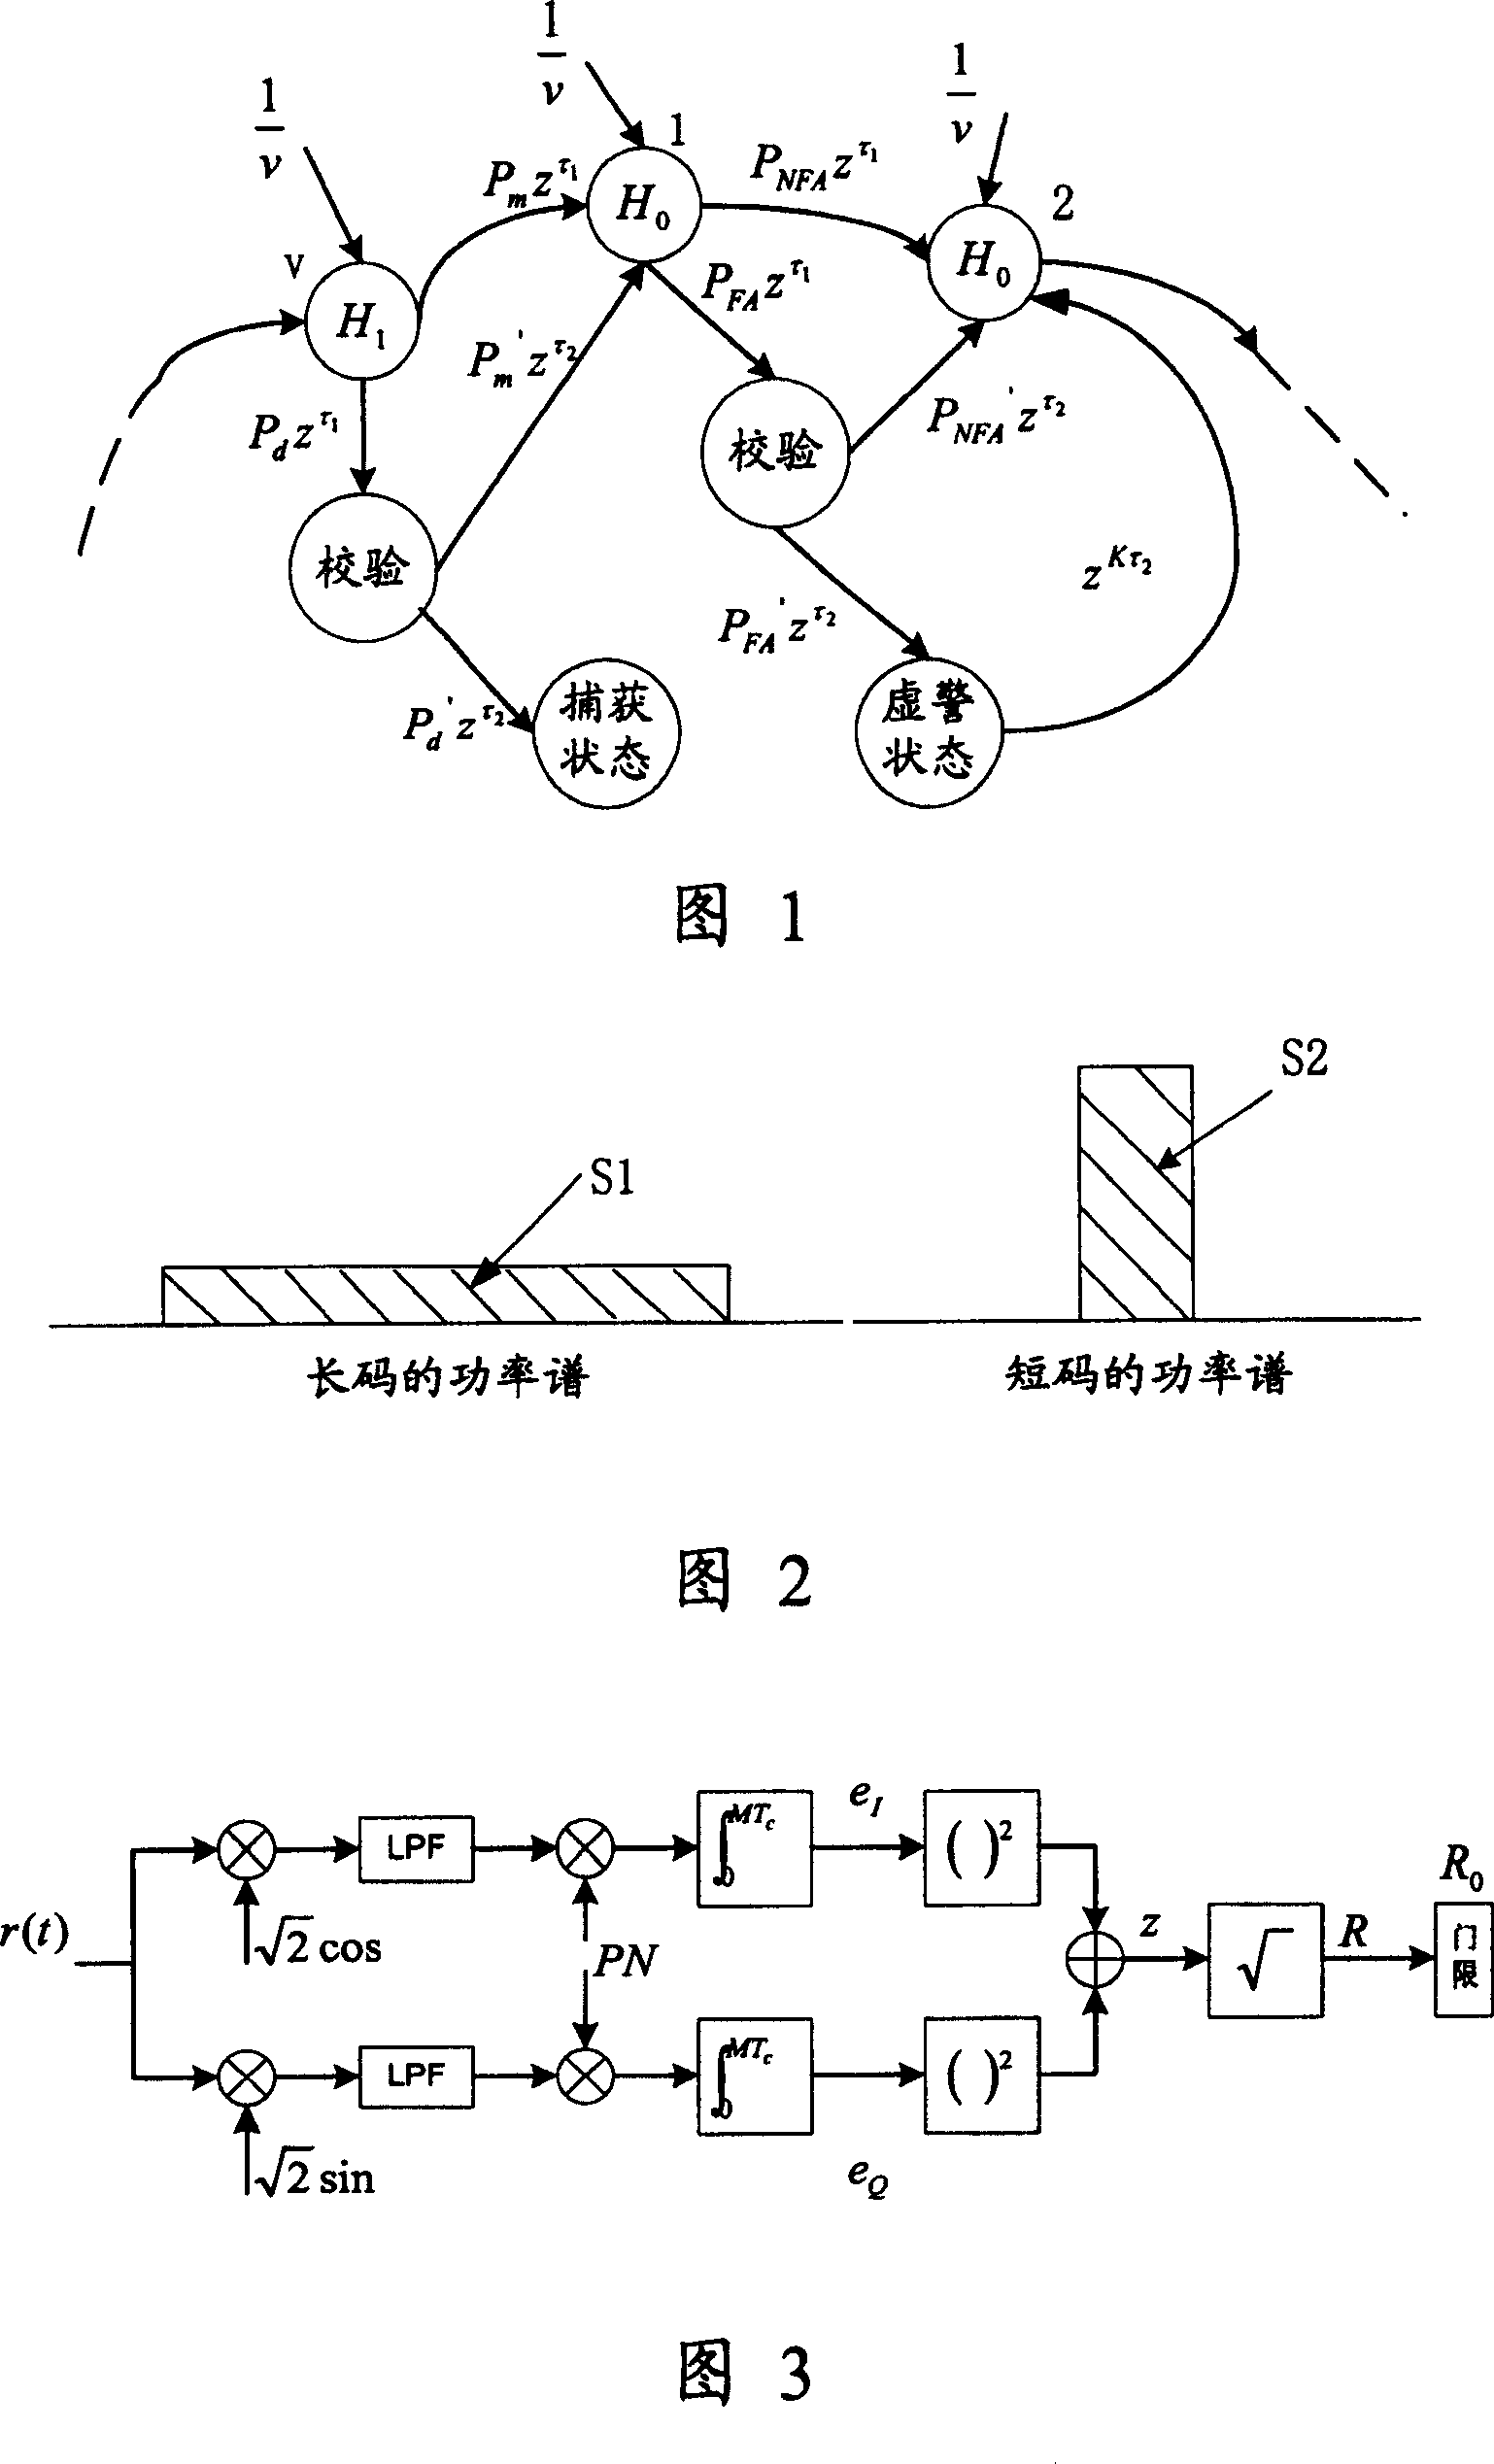 A method of capture under continuous transmission of spread spectrum communication system